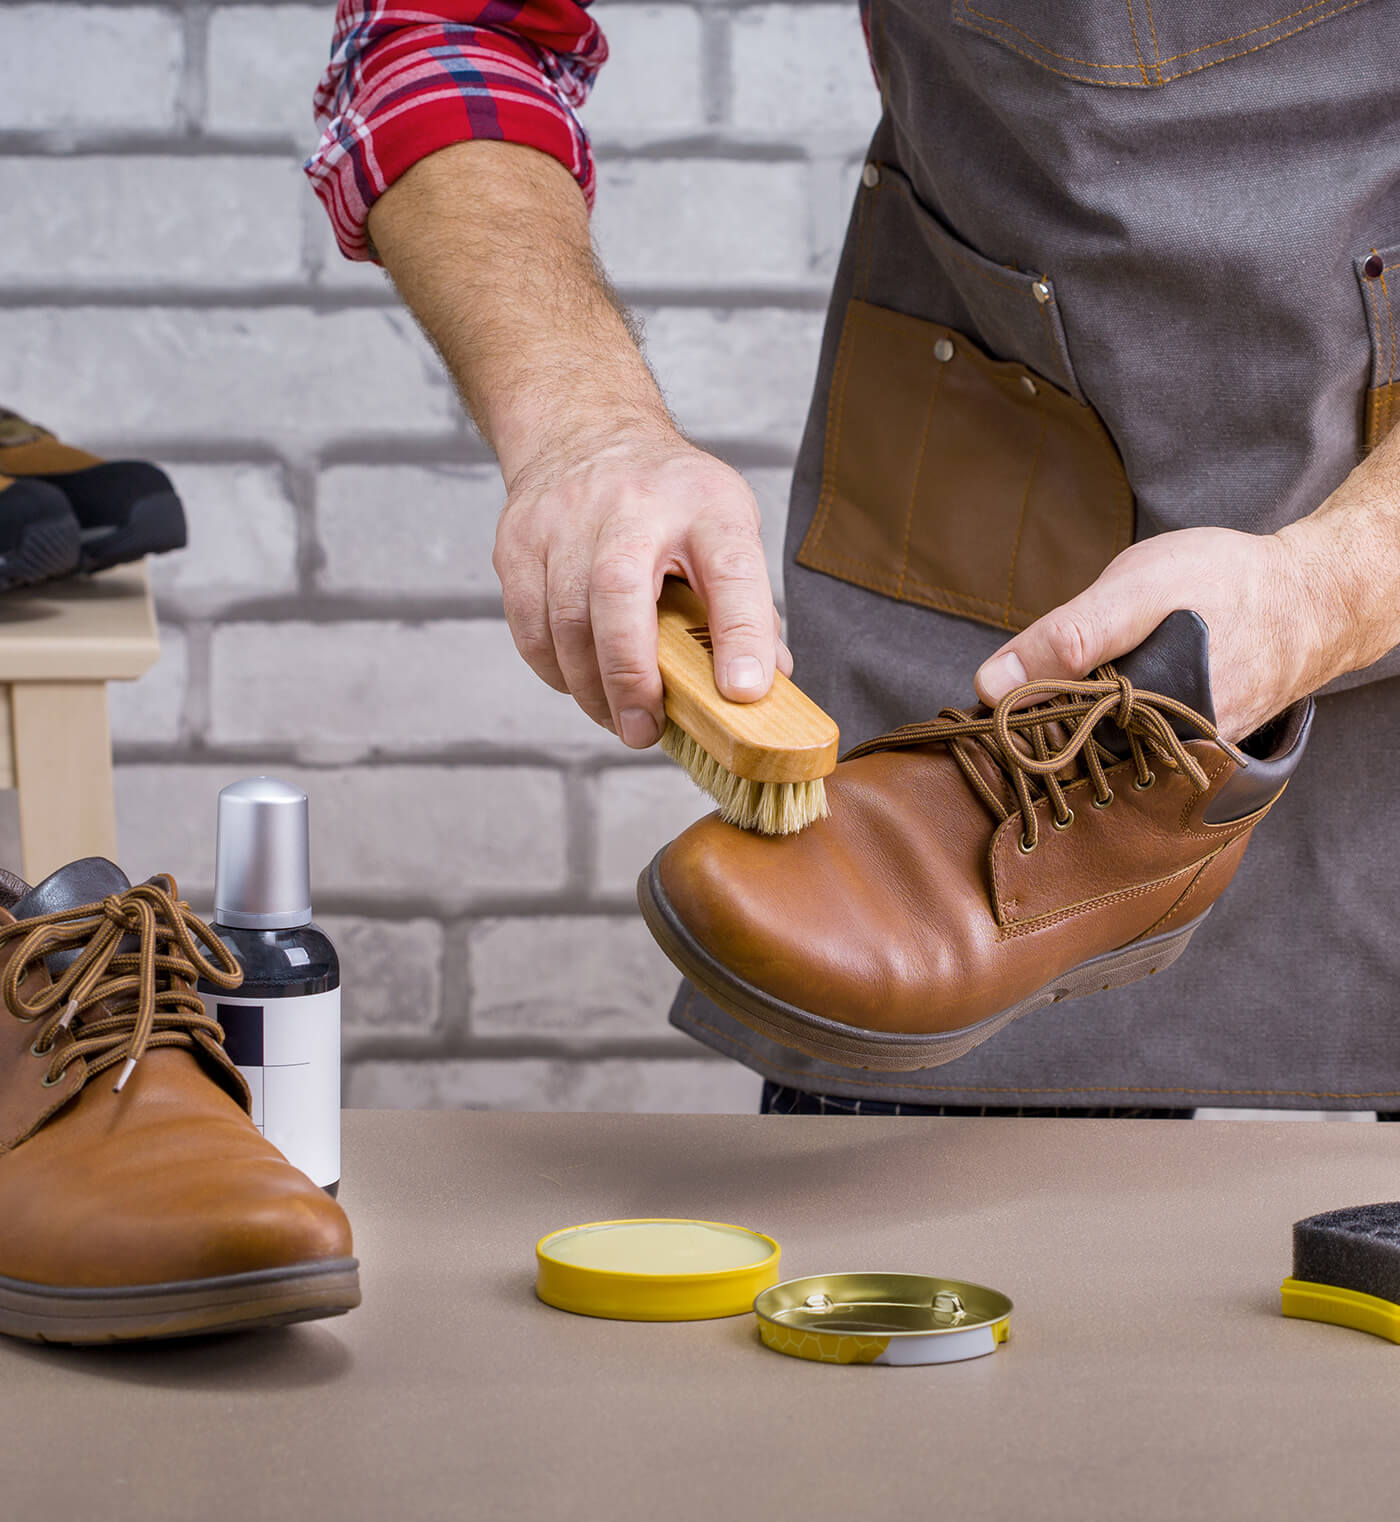 Suppliers for shoe repairers